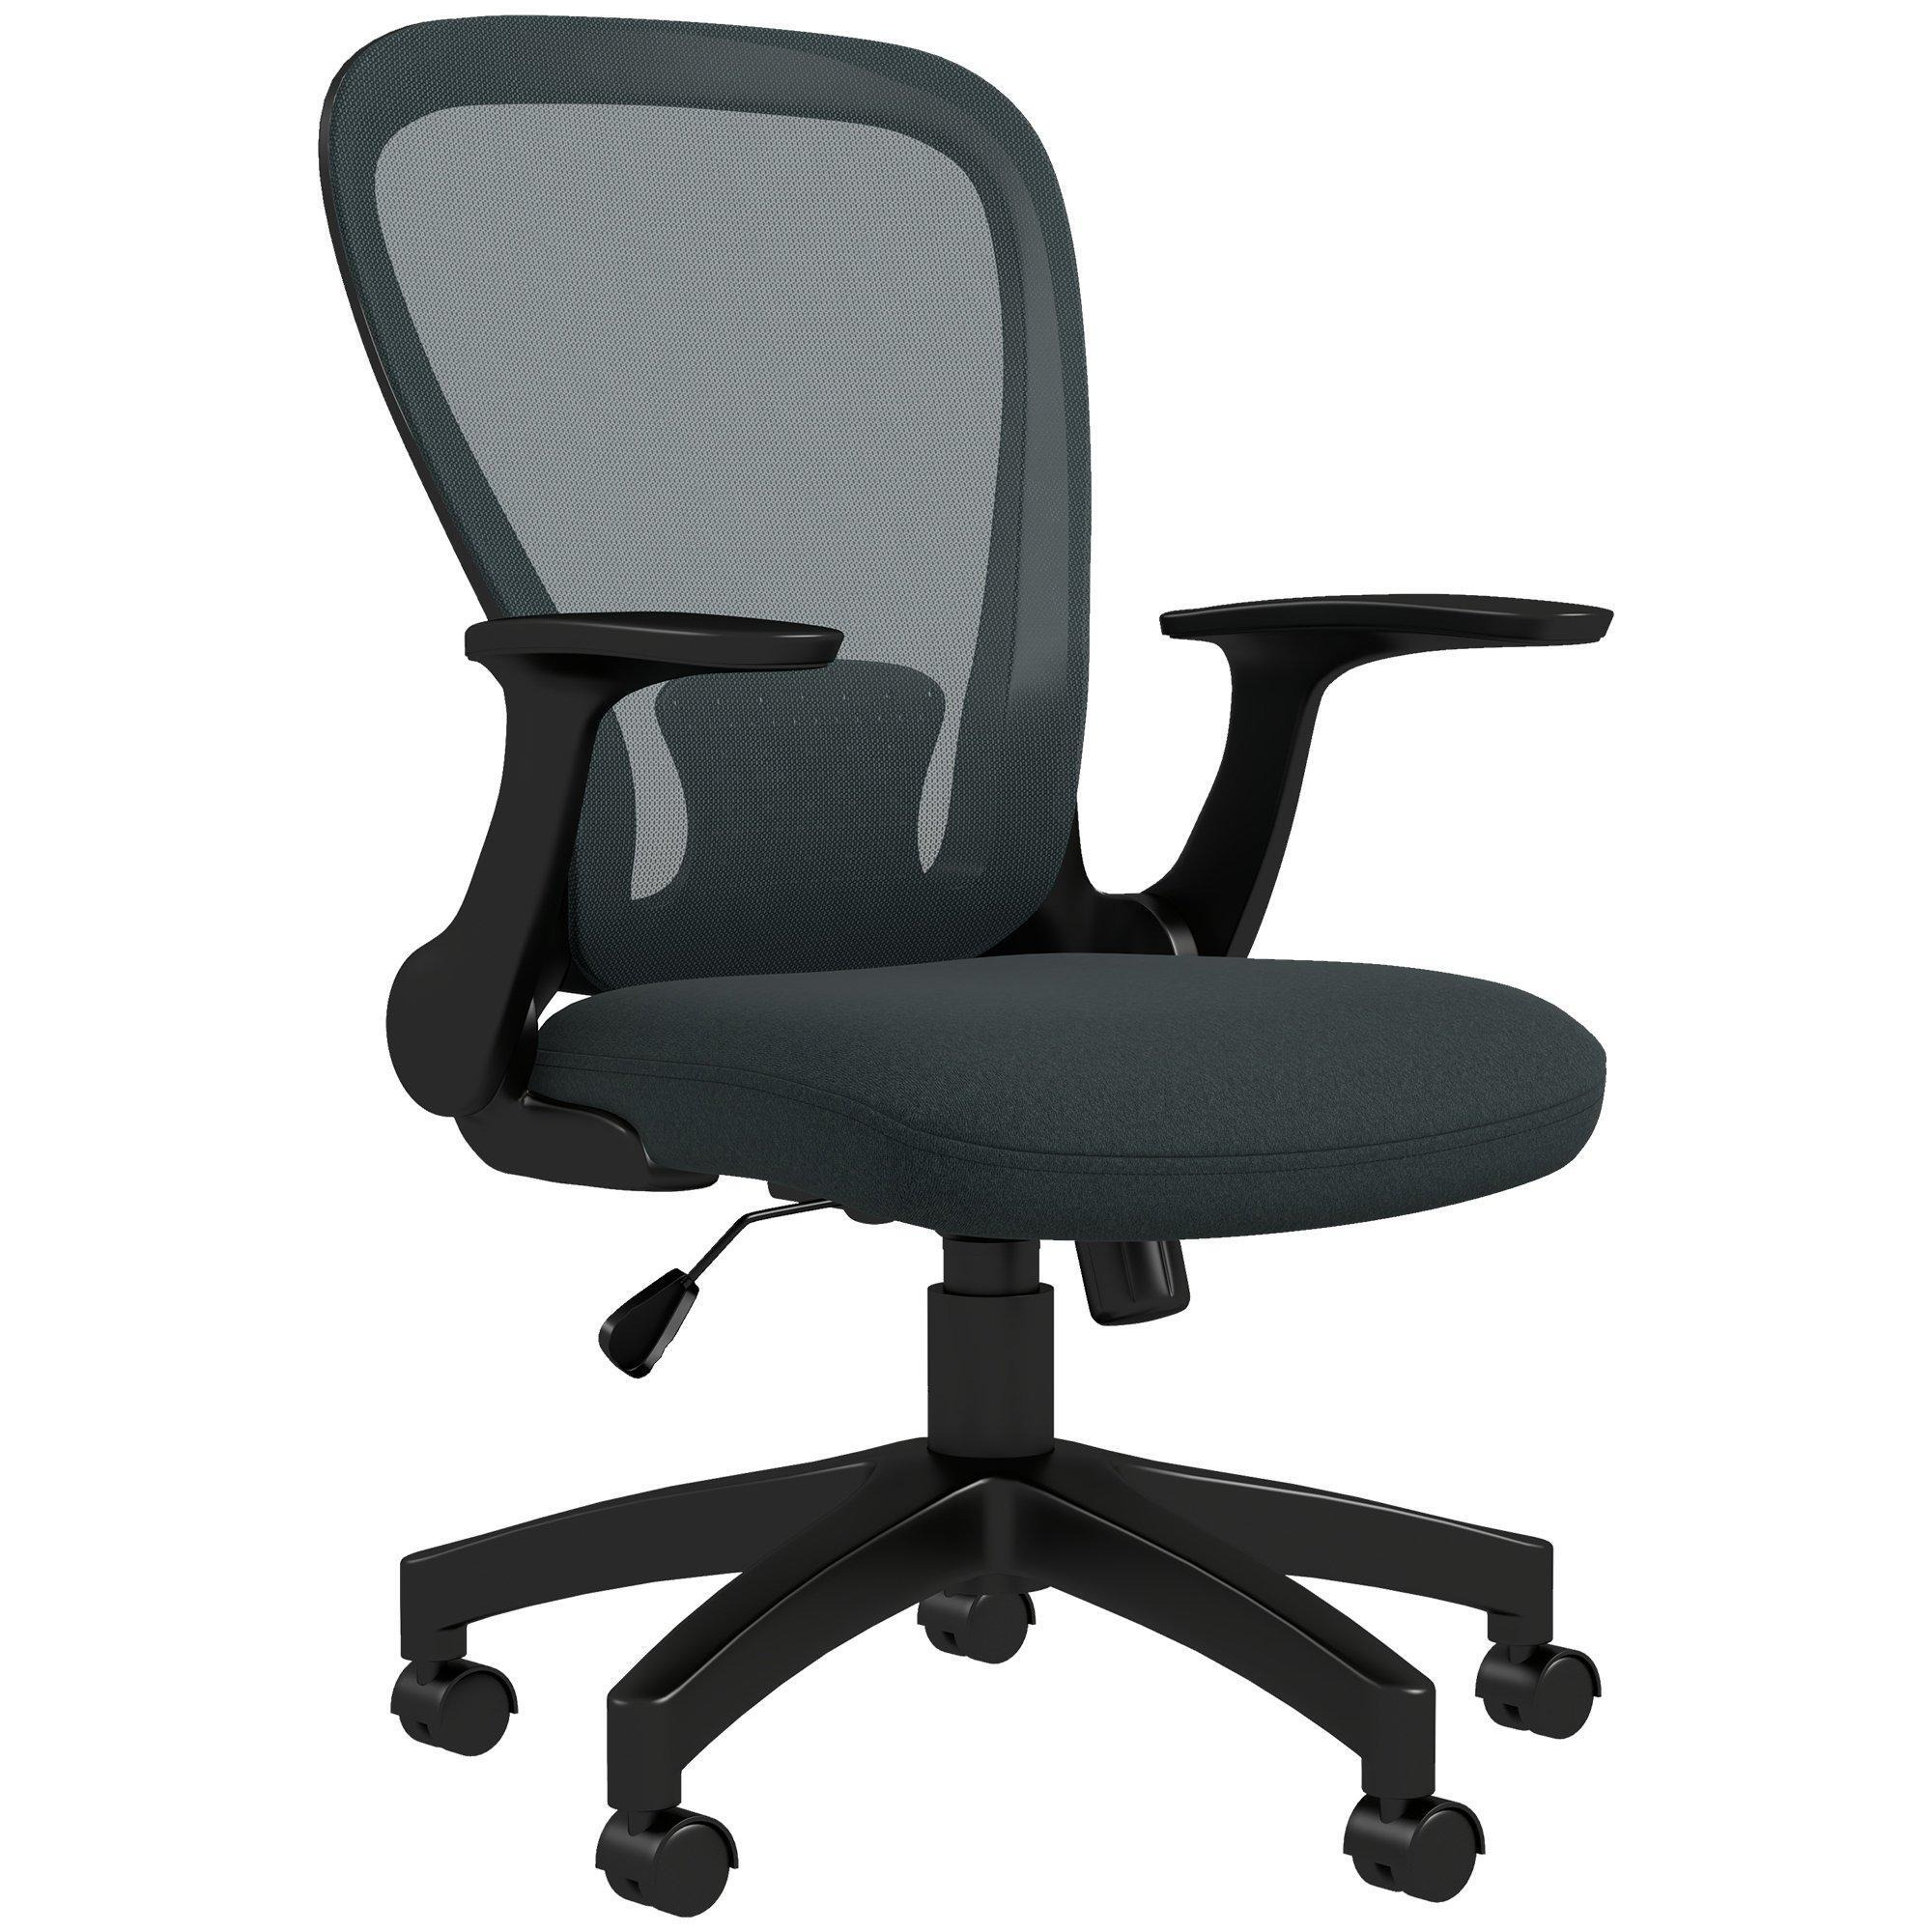 Ergonomic Mesh Office Chair with Adjustable Arm Lumbar Back Support - image 1